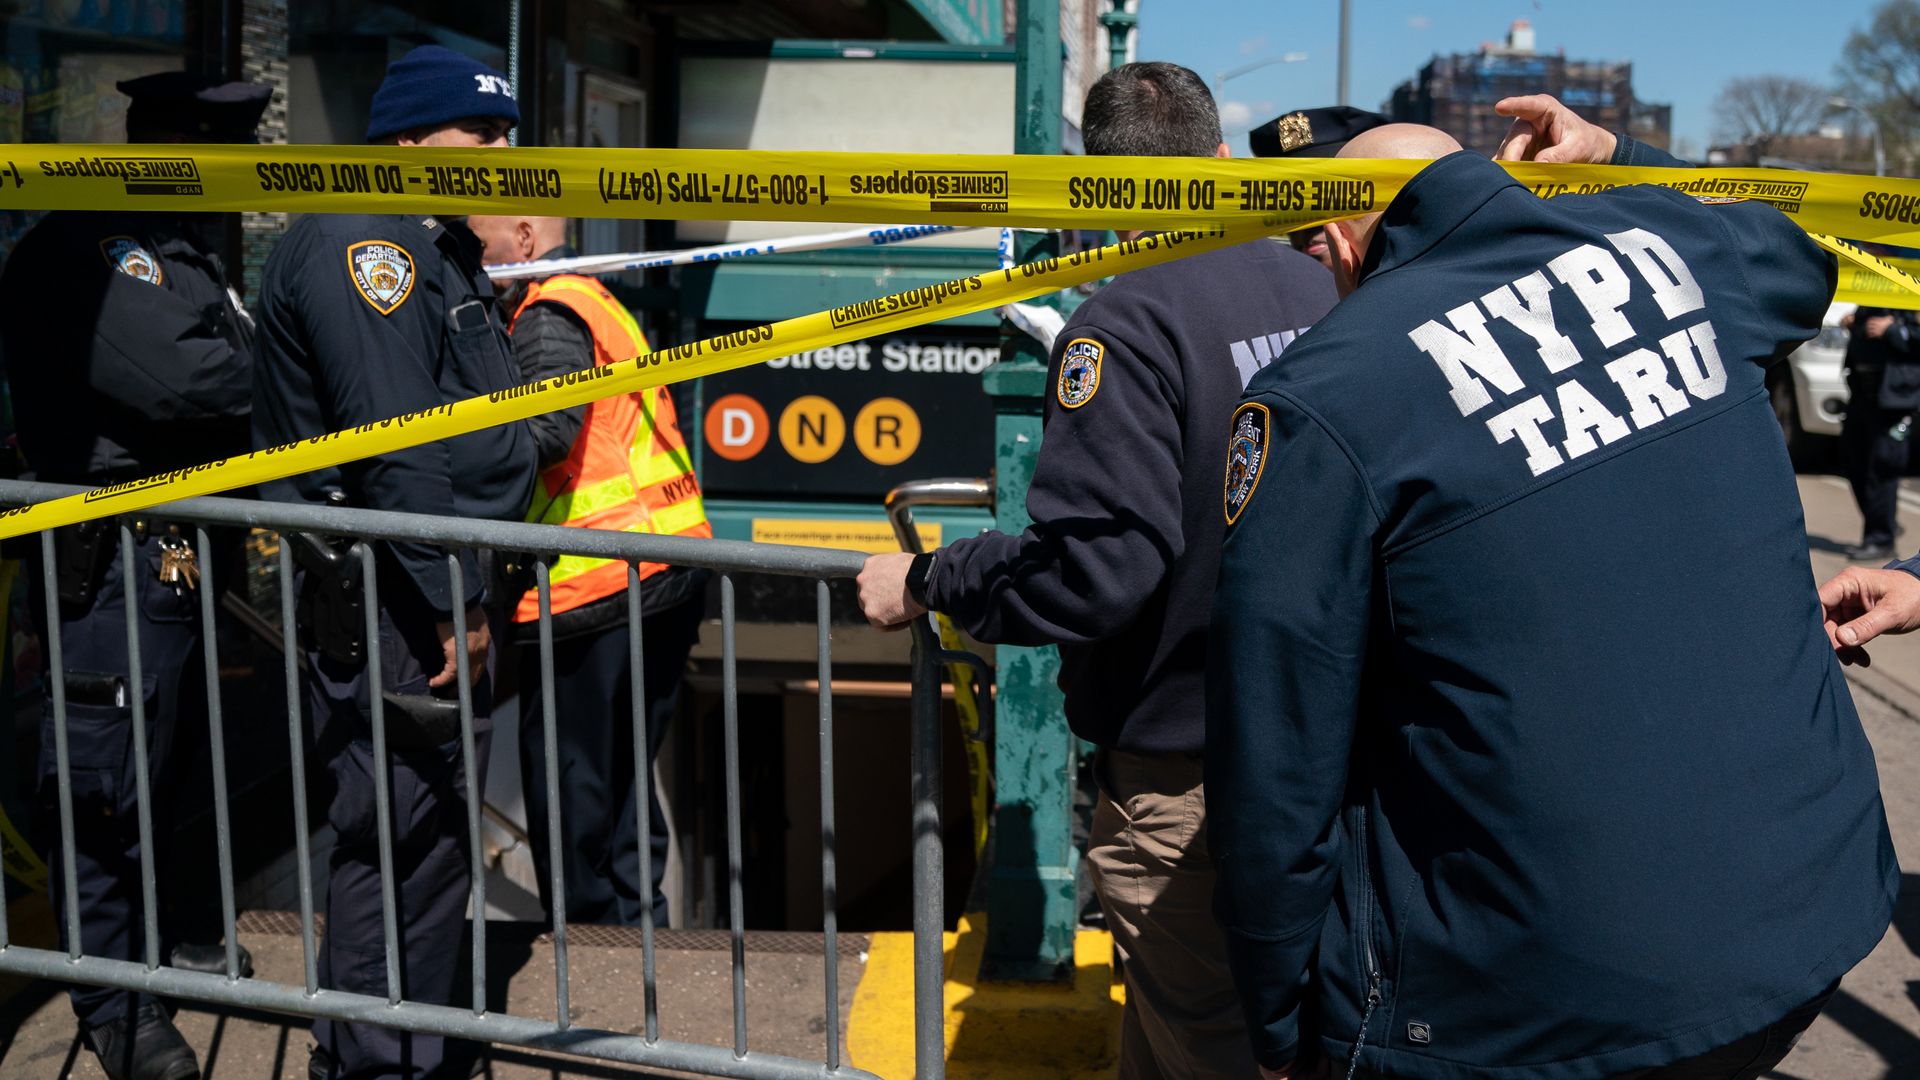 Members of the NYPD gather at the site of a shooting at the 36 St subway station in New York City.